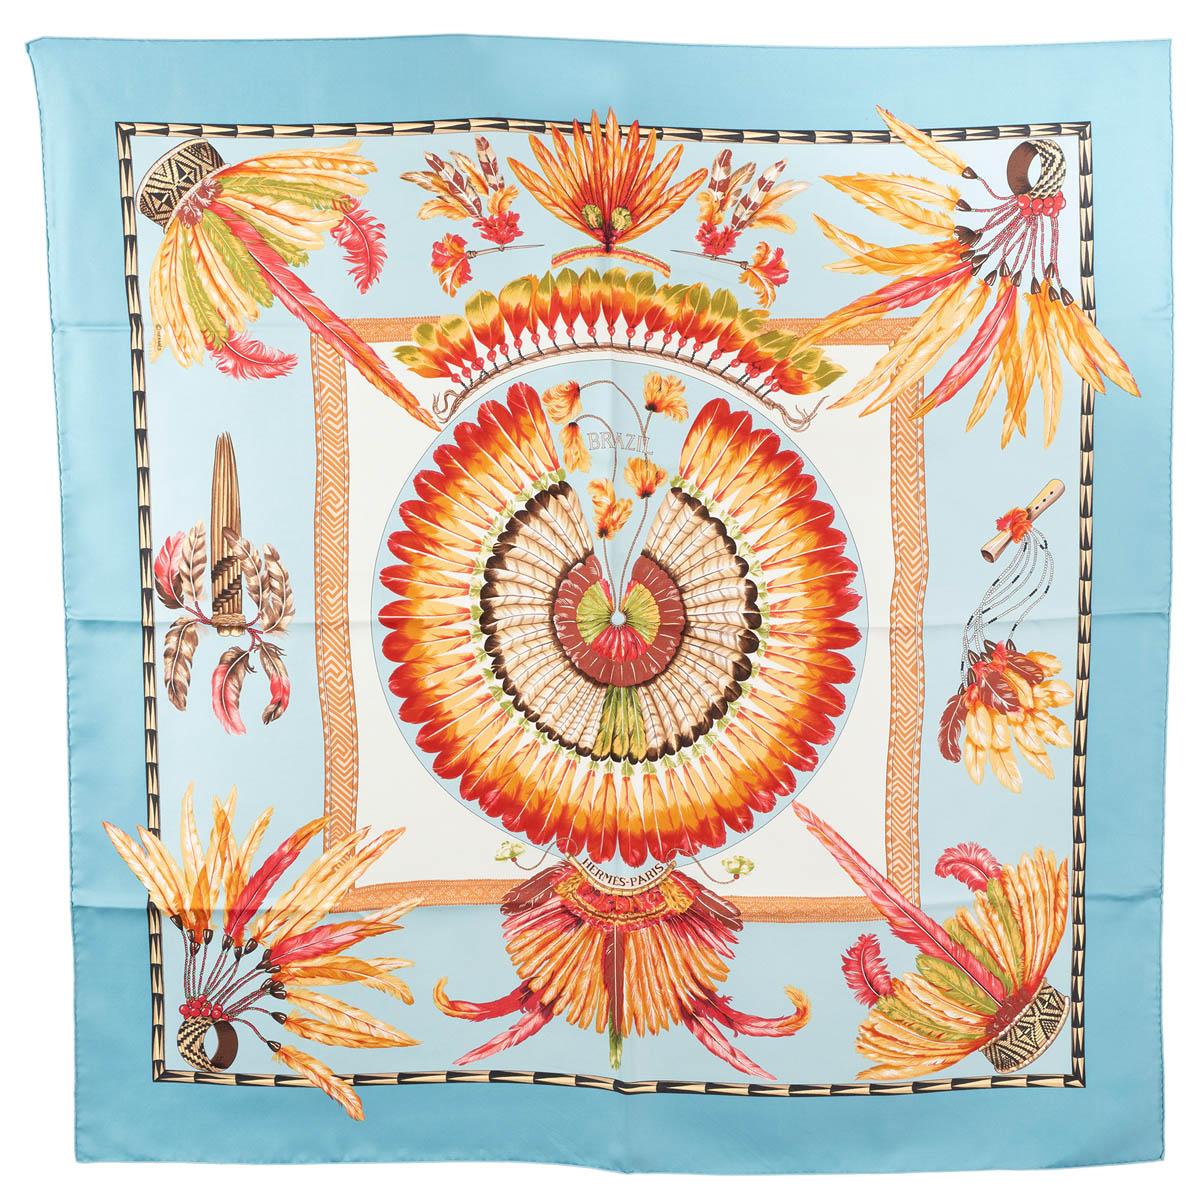 How much is a Hermes scarf?